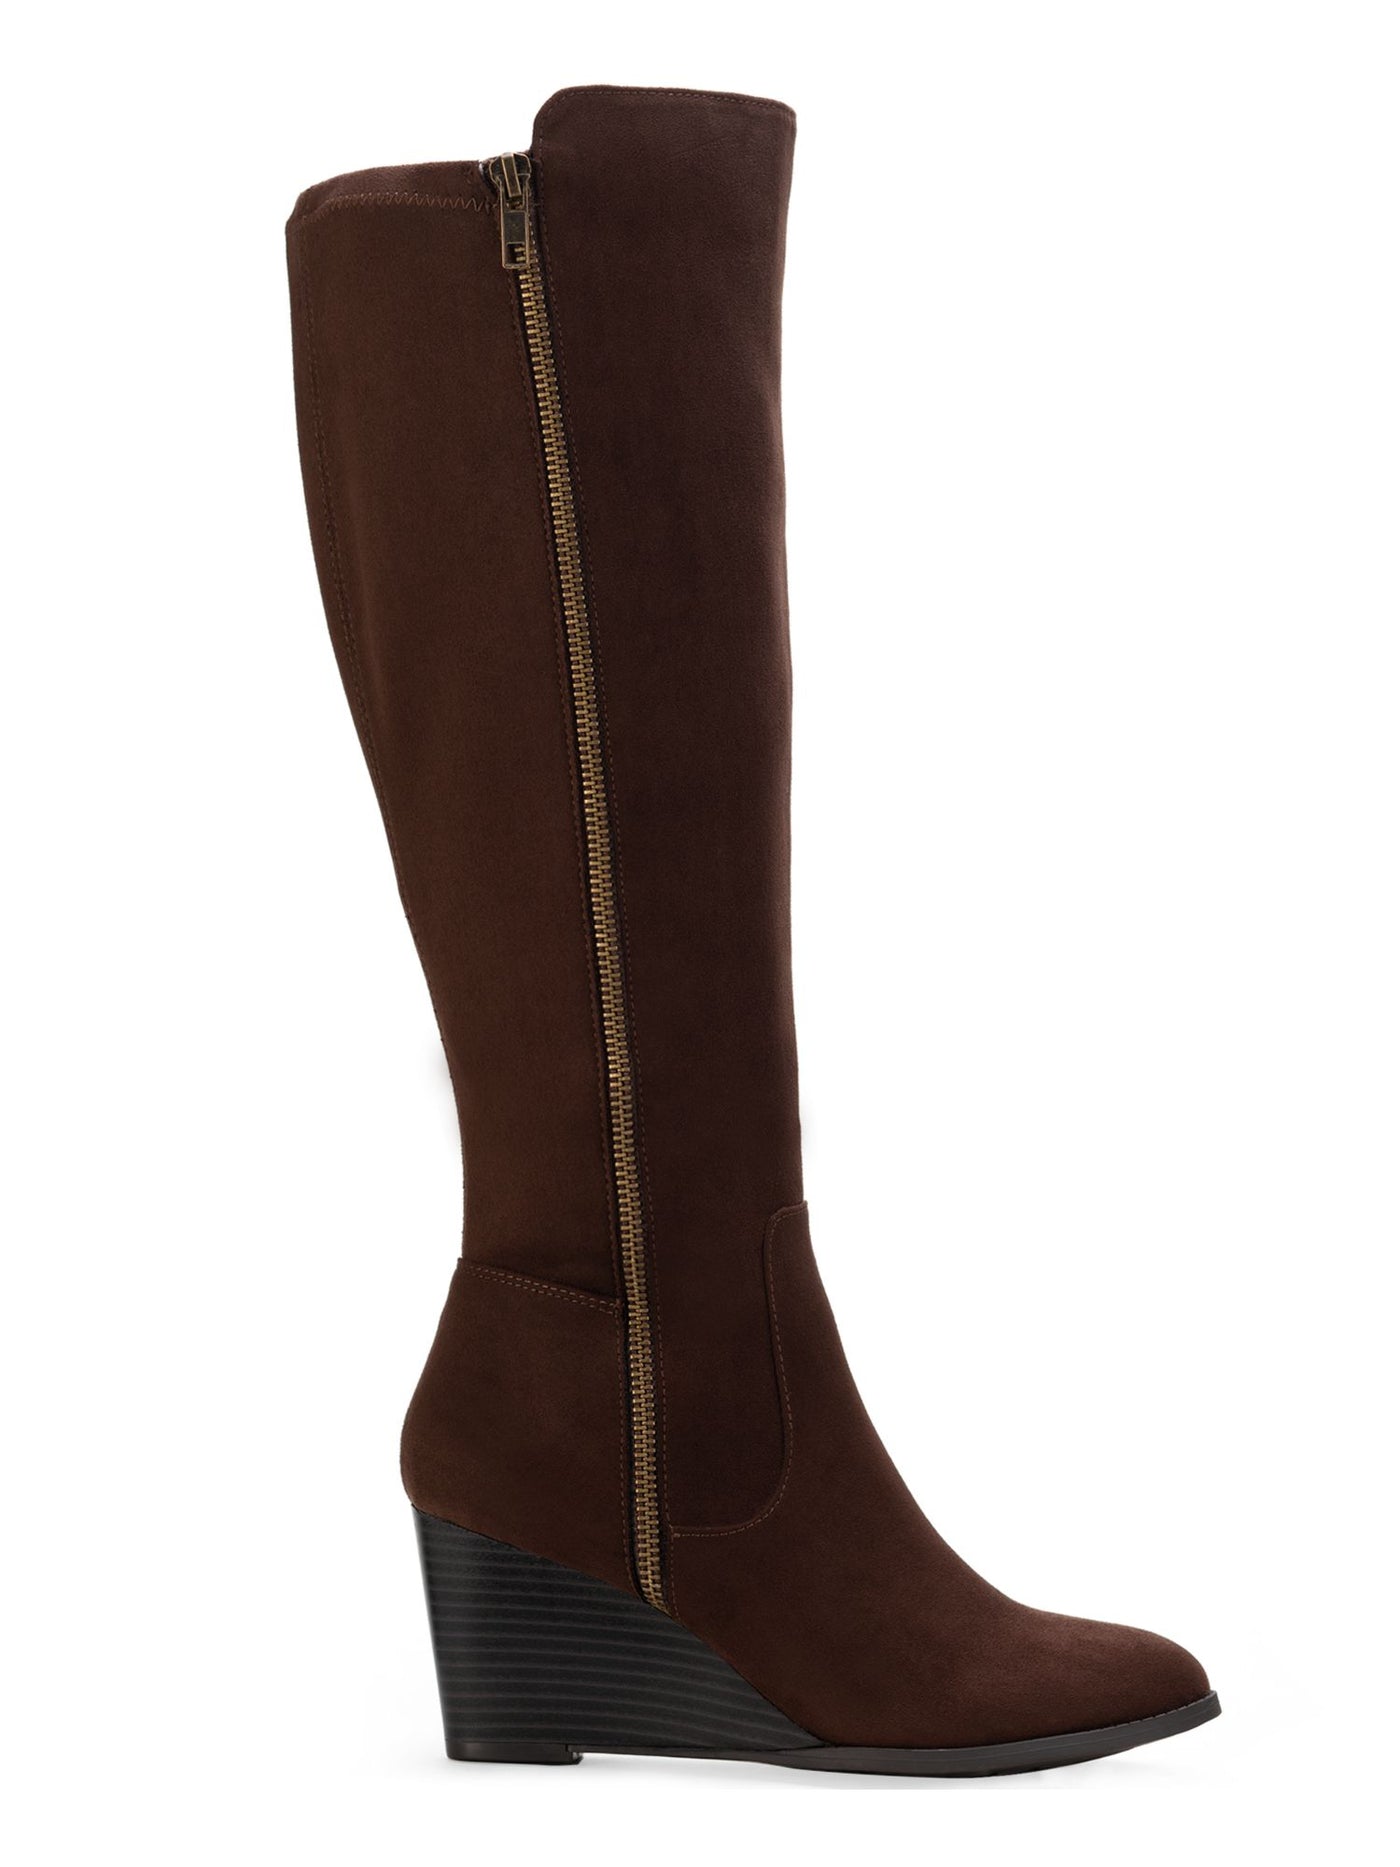 STYLE & COMPANY Womens Brown Dual Zip Round Toe Wedge Zip-Up Dress Boots 5.5